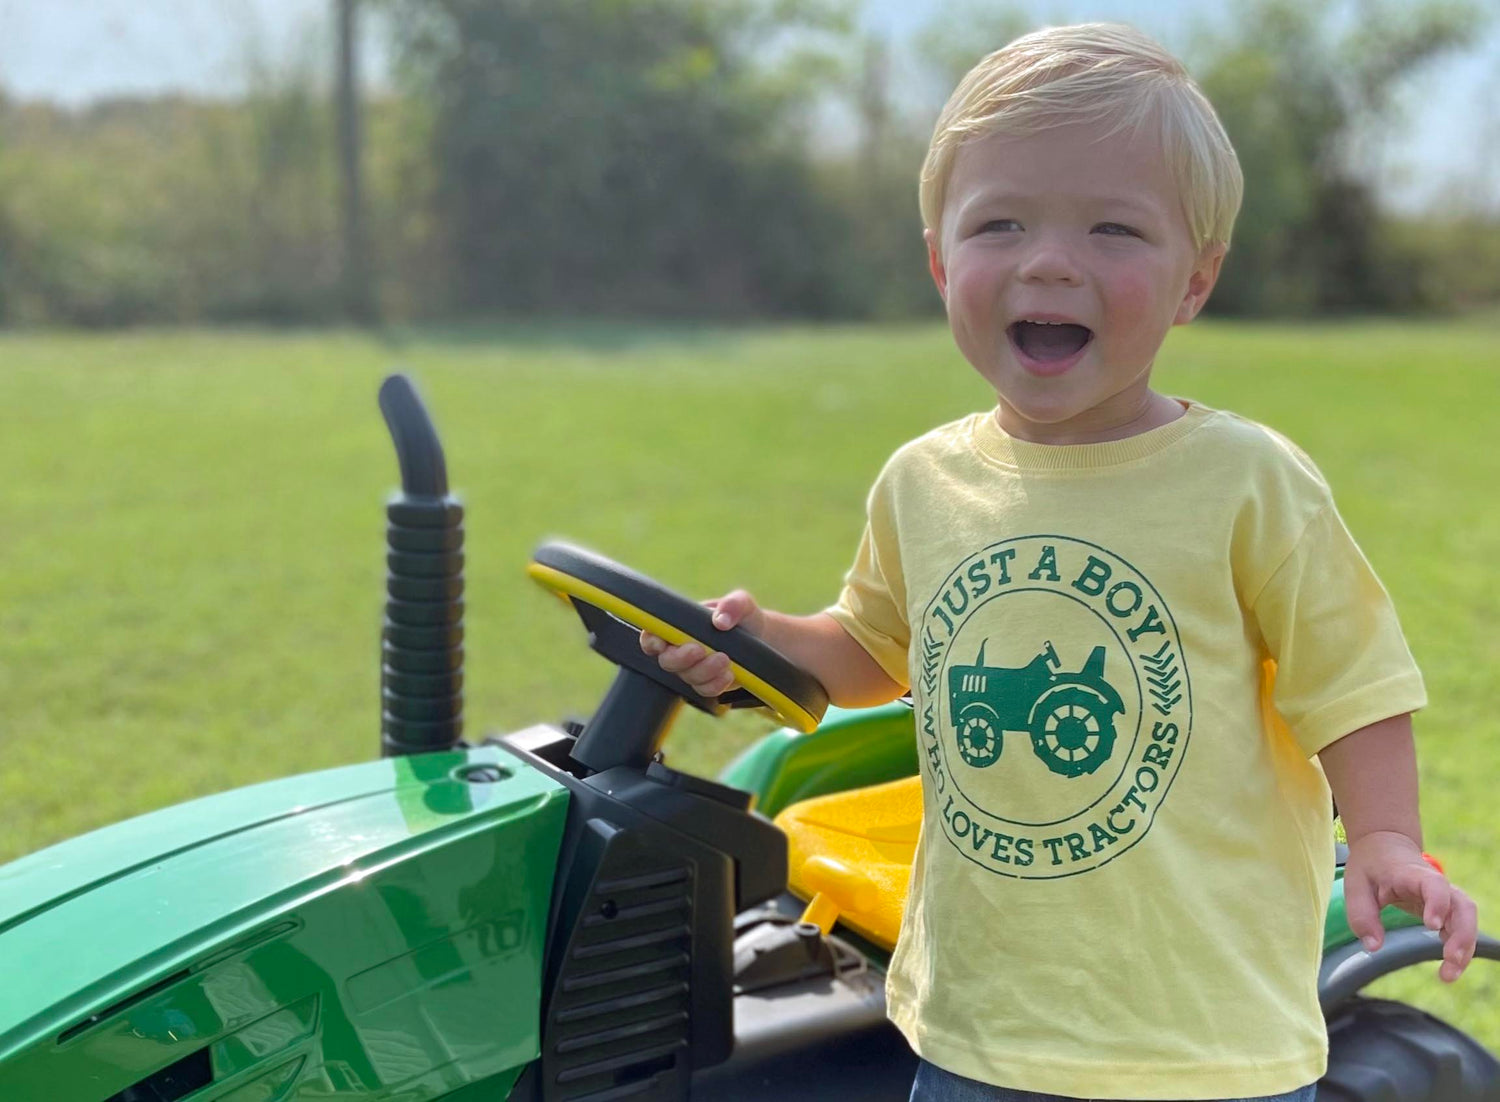 Oh Boy! Tees Just a Boy Who Loves Tractors yellow and green graphic tee shirt is available in yellow, blue, and navy with a green silk screen design. Soft cotton fabric makes this the perfect tee shirt for your busy little boy. 